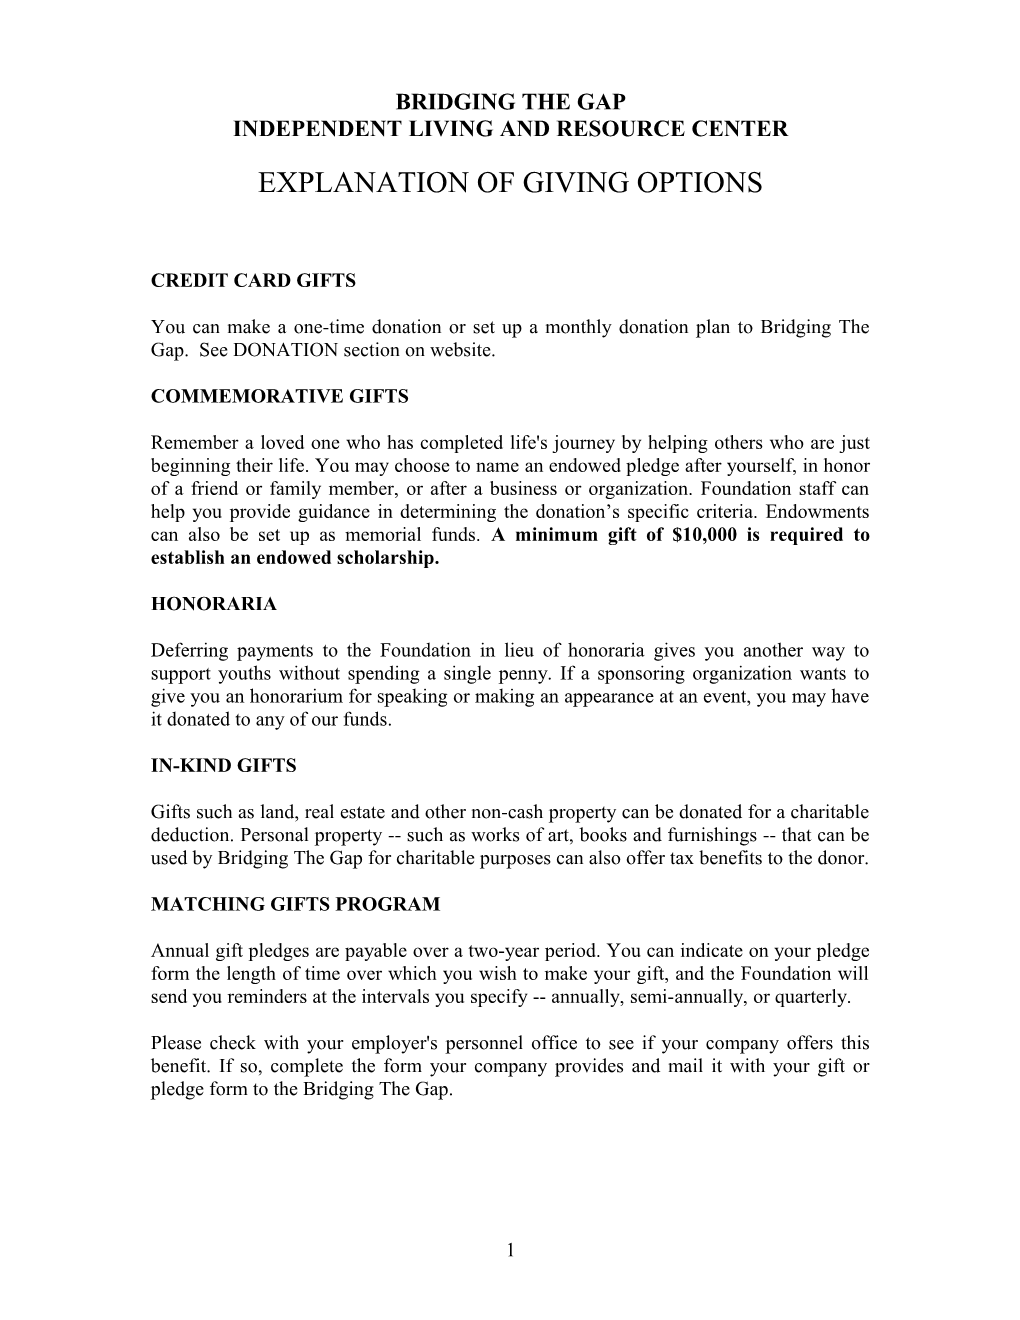 Explanation of Giving Options